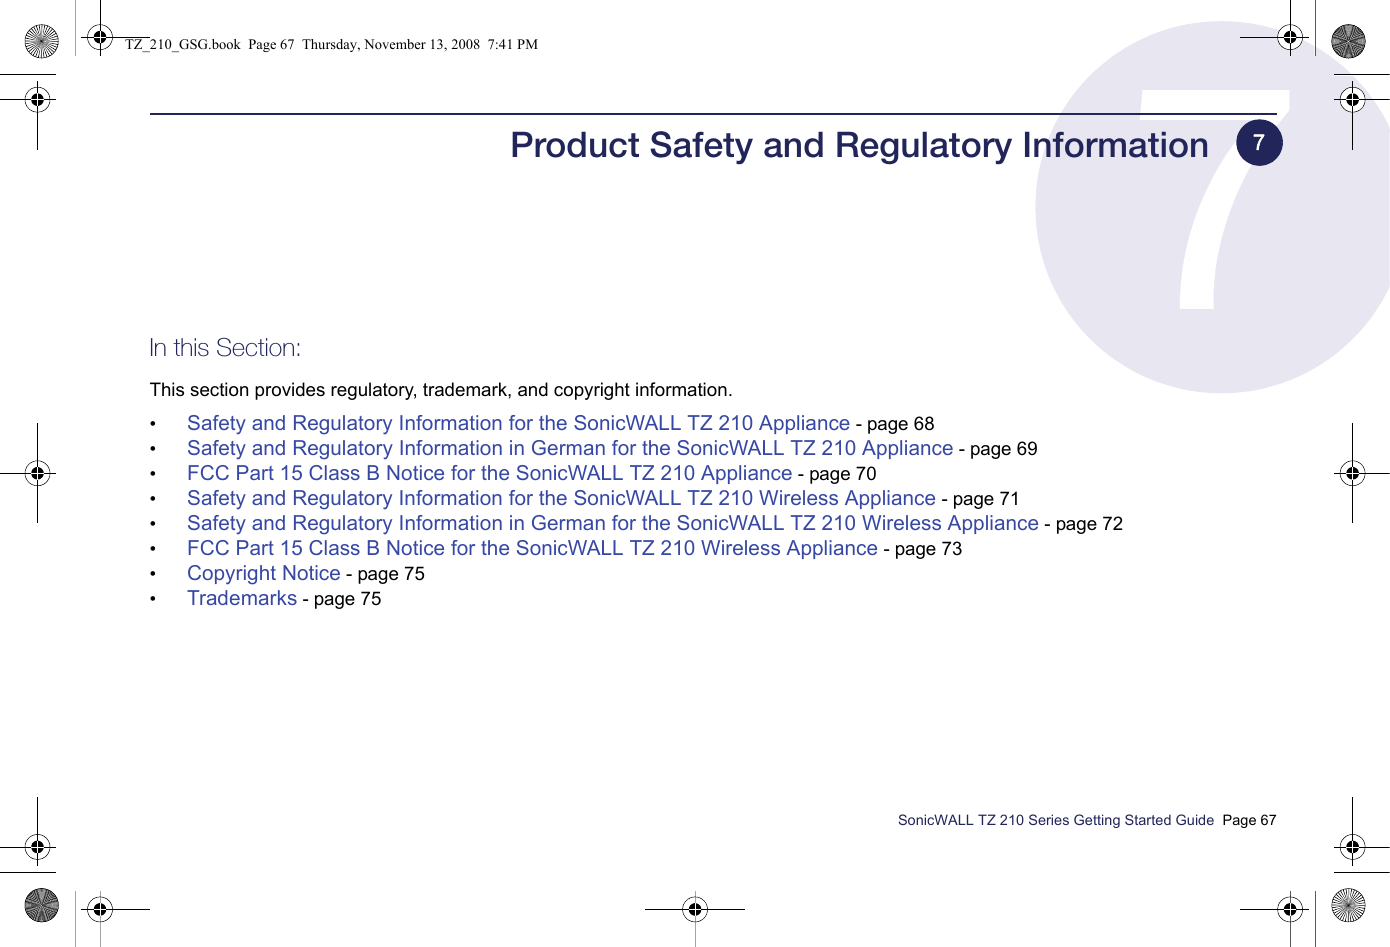 SonicWALL TZ 210 Series Getting Started Guide  Page 67Product Safety and Regulatory InformationIn this Section:This section provides regulatory, trademark, and copyright information.•Safety and Regulatory Information for the SonicWALL TZ 210 Appliance - page 68•Safety and Regulatory Information in German for the SonicWALL TZ 210 Appliance - page 69•FCC Part 15 Class B Notice for the SonicWALL TZ 210 Appliance - page 70•Safety and Regulatory Information for the SonicWALL TZ 210 Wireless Appliance - page 71•Safety and Regulatory Information in German for the SonicWALL TZ 210 Wireless Appliance - page 72•FCC Part 15 Class B Notice for the SonicWALL TZ 210 Wireless Appliance - page 73•Copyright Notice - page 75•Trademarks - page 757TZ_210_GSG.book  Page 67  Thursday, November 13, 2008  7:41 PM